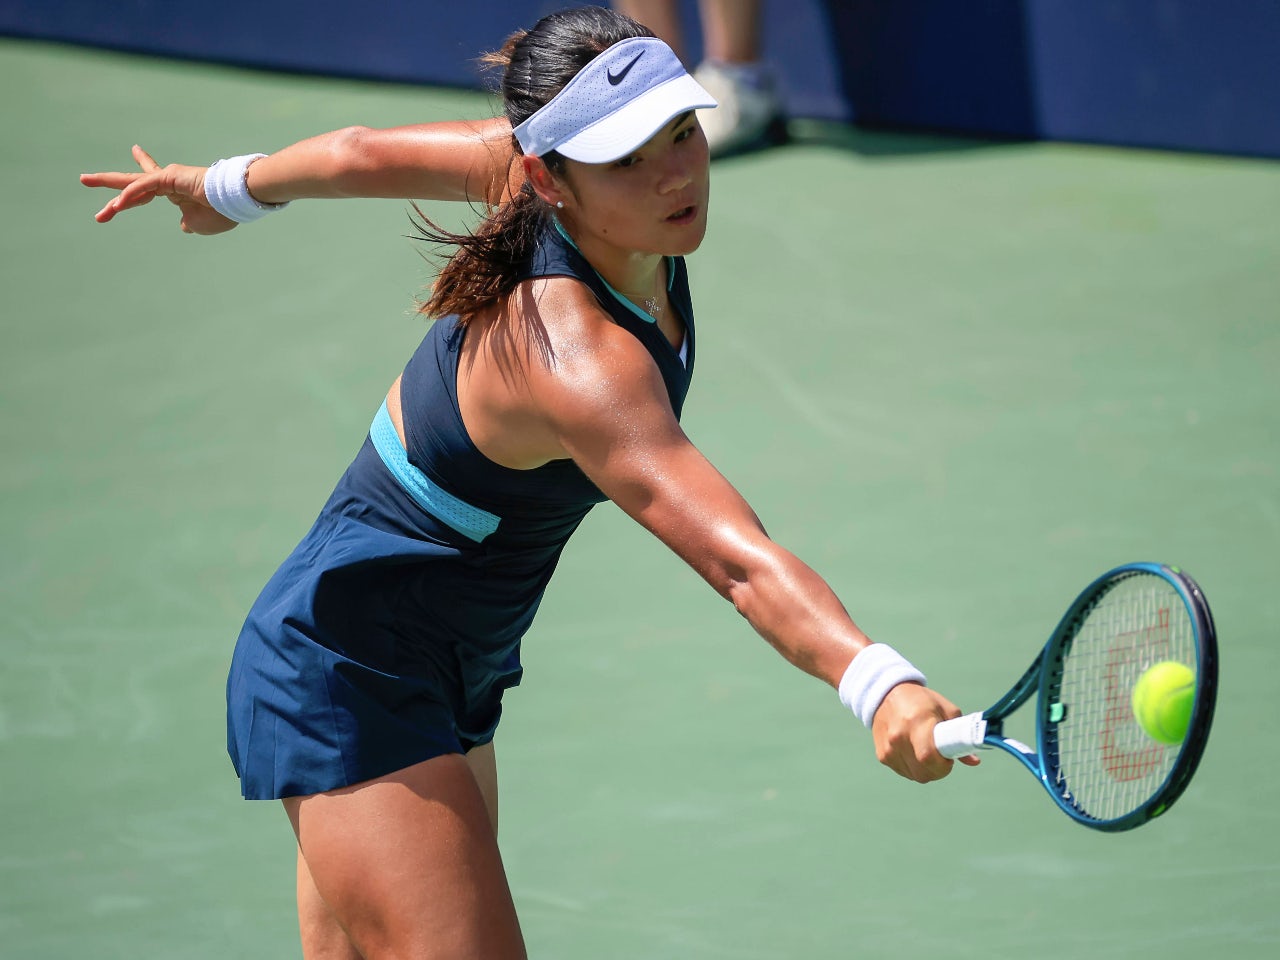 Emma Raducanu saves match point before fatal double fault in Washington Open